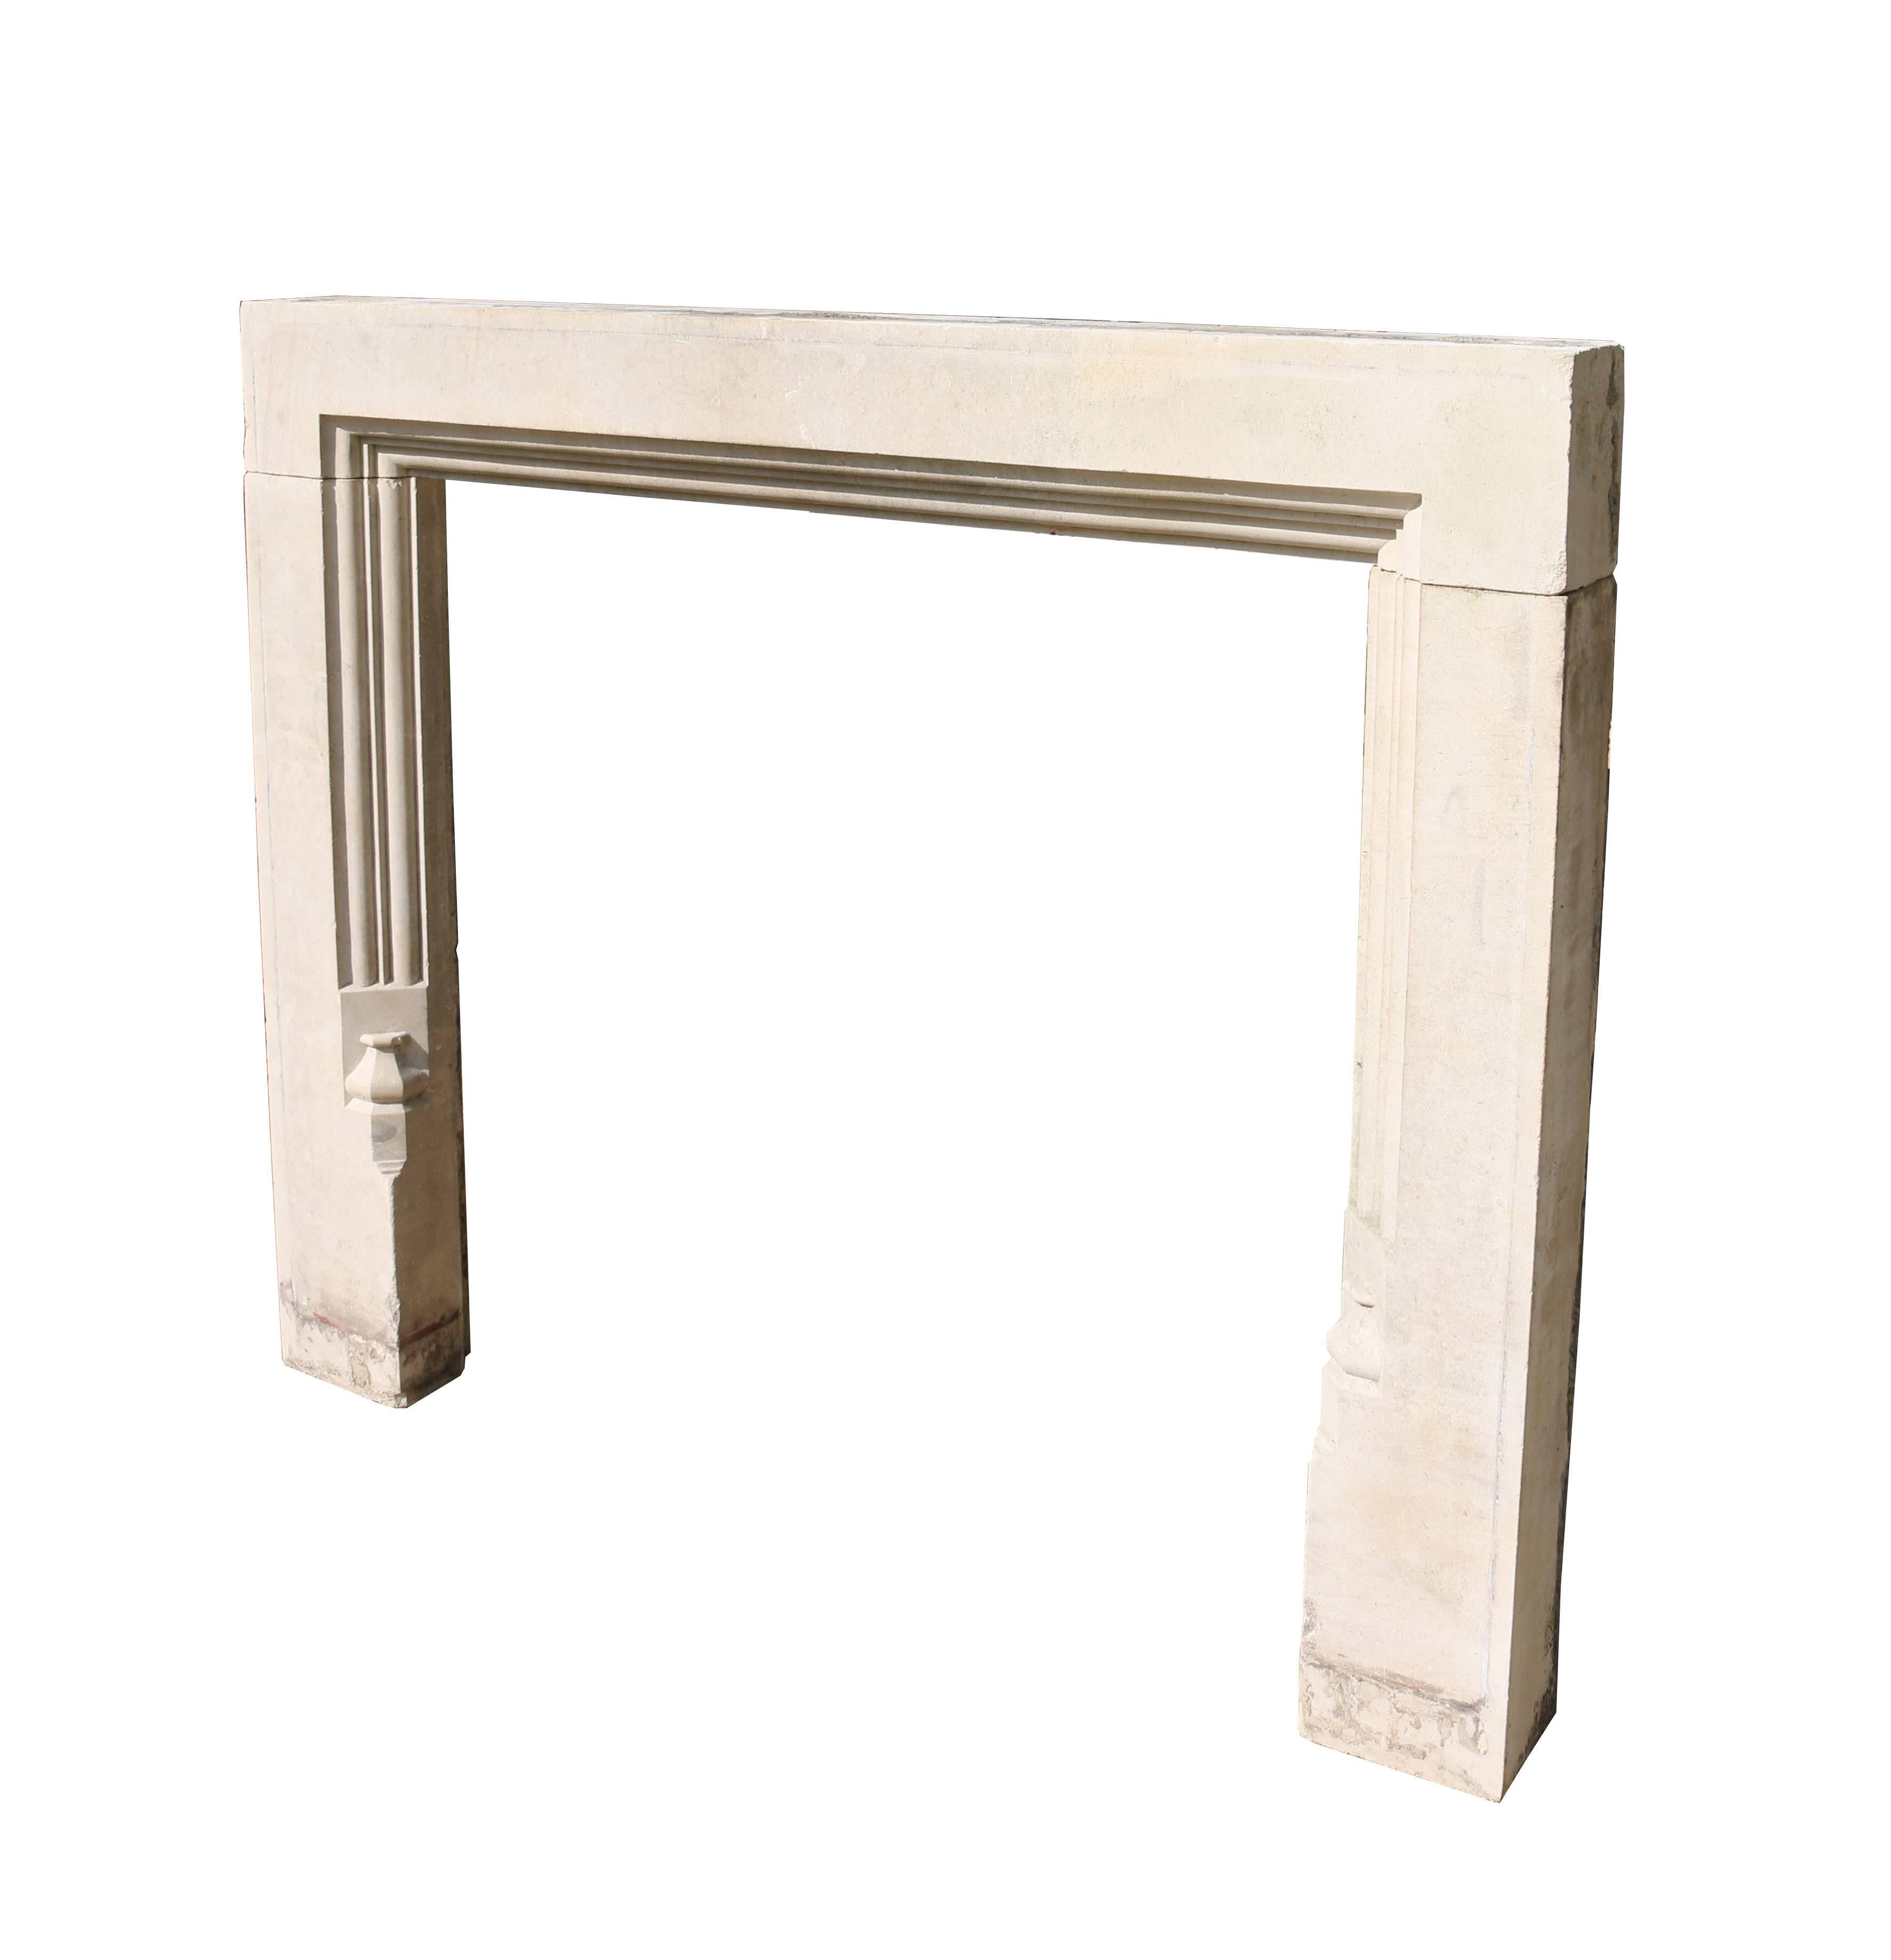 Antique Portland limestone fire surround, circa 1910. Measures: Opening height 99.5 
Opening width 102 cm.